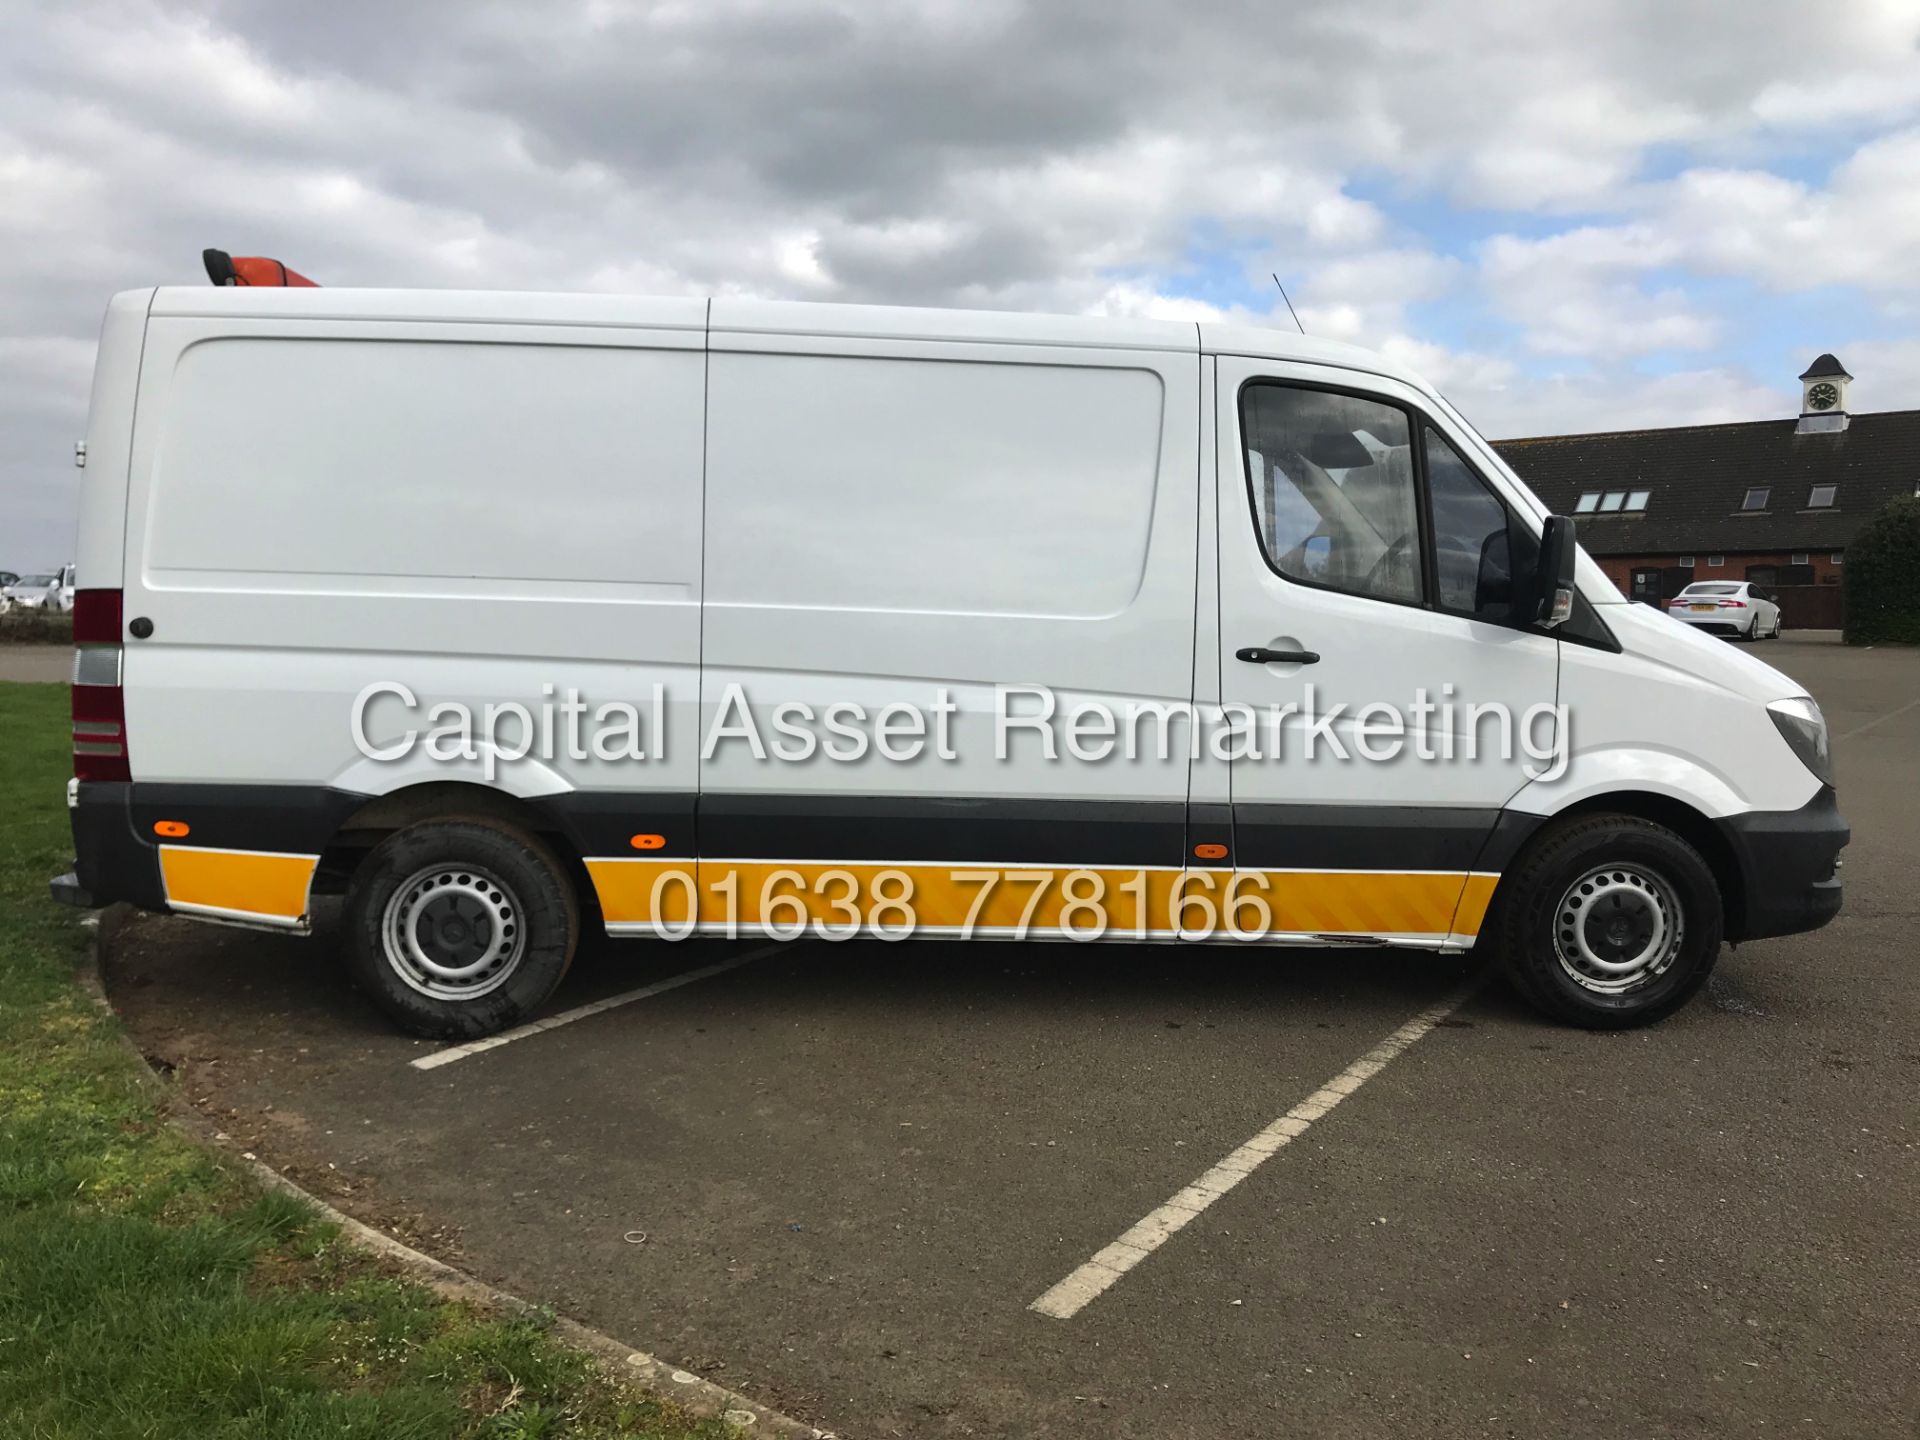 (ON SALE) MERCEDES SPRINTER 313CDI "130BHP" (14 REG) AIR CON - 1 OWNER FSH - ELEC PACK - CRUISE - Image 2 of 16